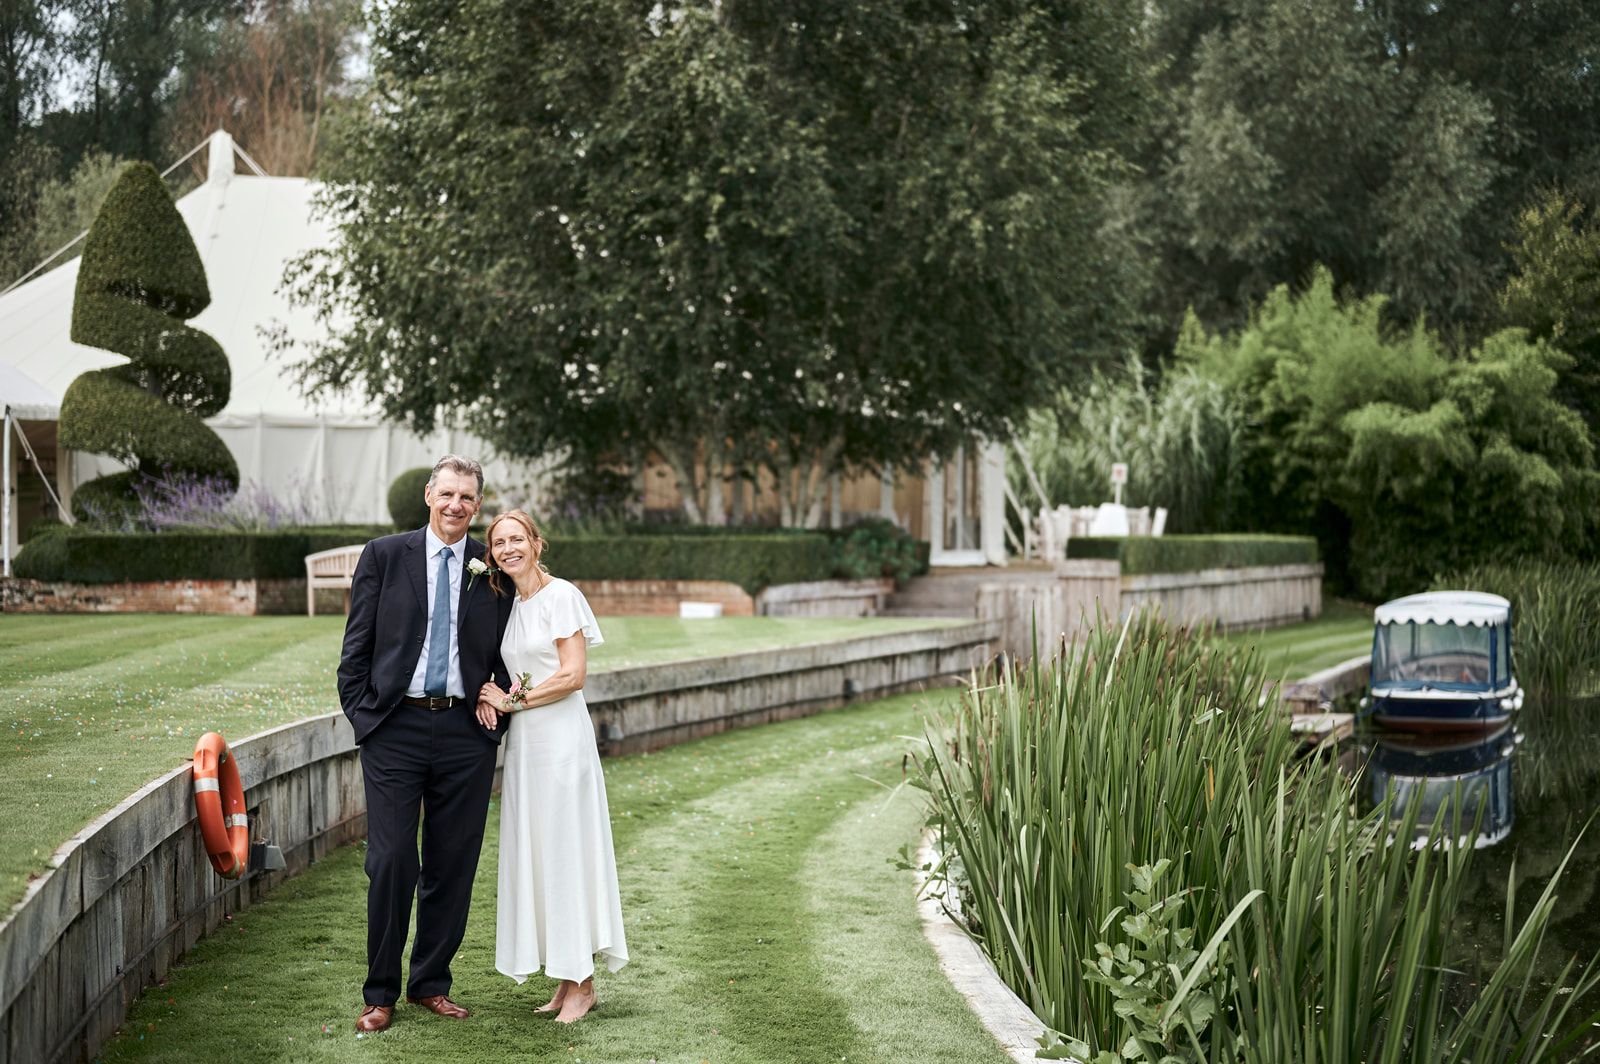 Talbooth Intimate Wedding - Rachèl Reeve Photography Couple